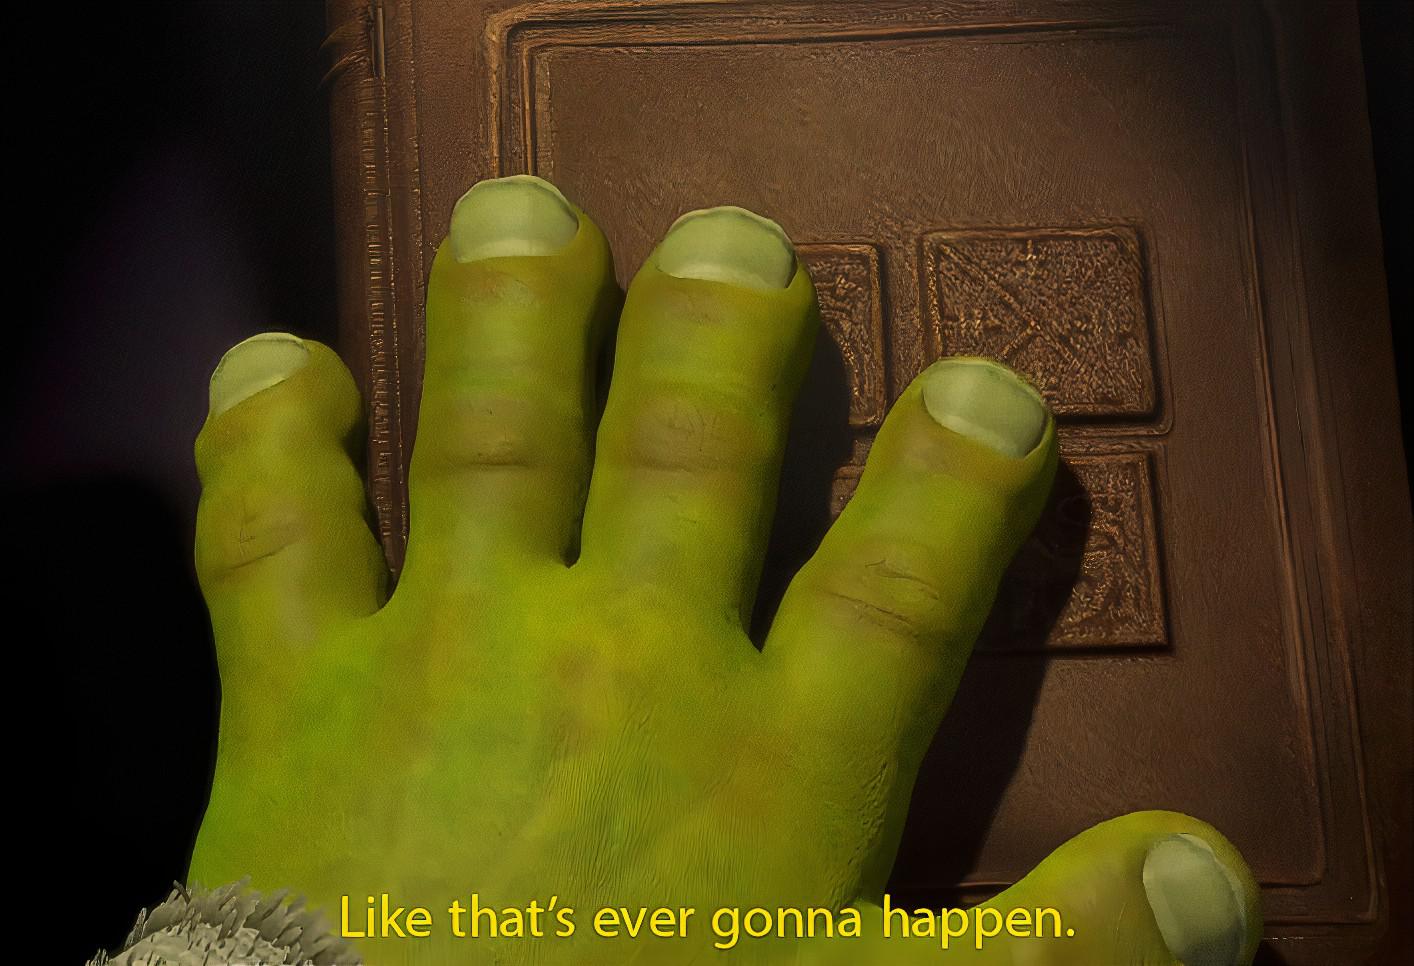 Shrek's Like that's ever gonna happen. From 1080p movie with color  correction and upscaling. : MemeRestoration